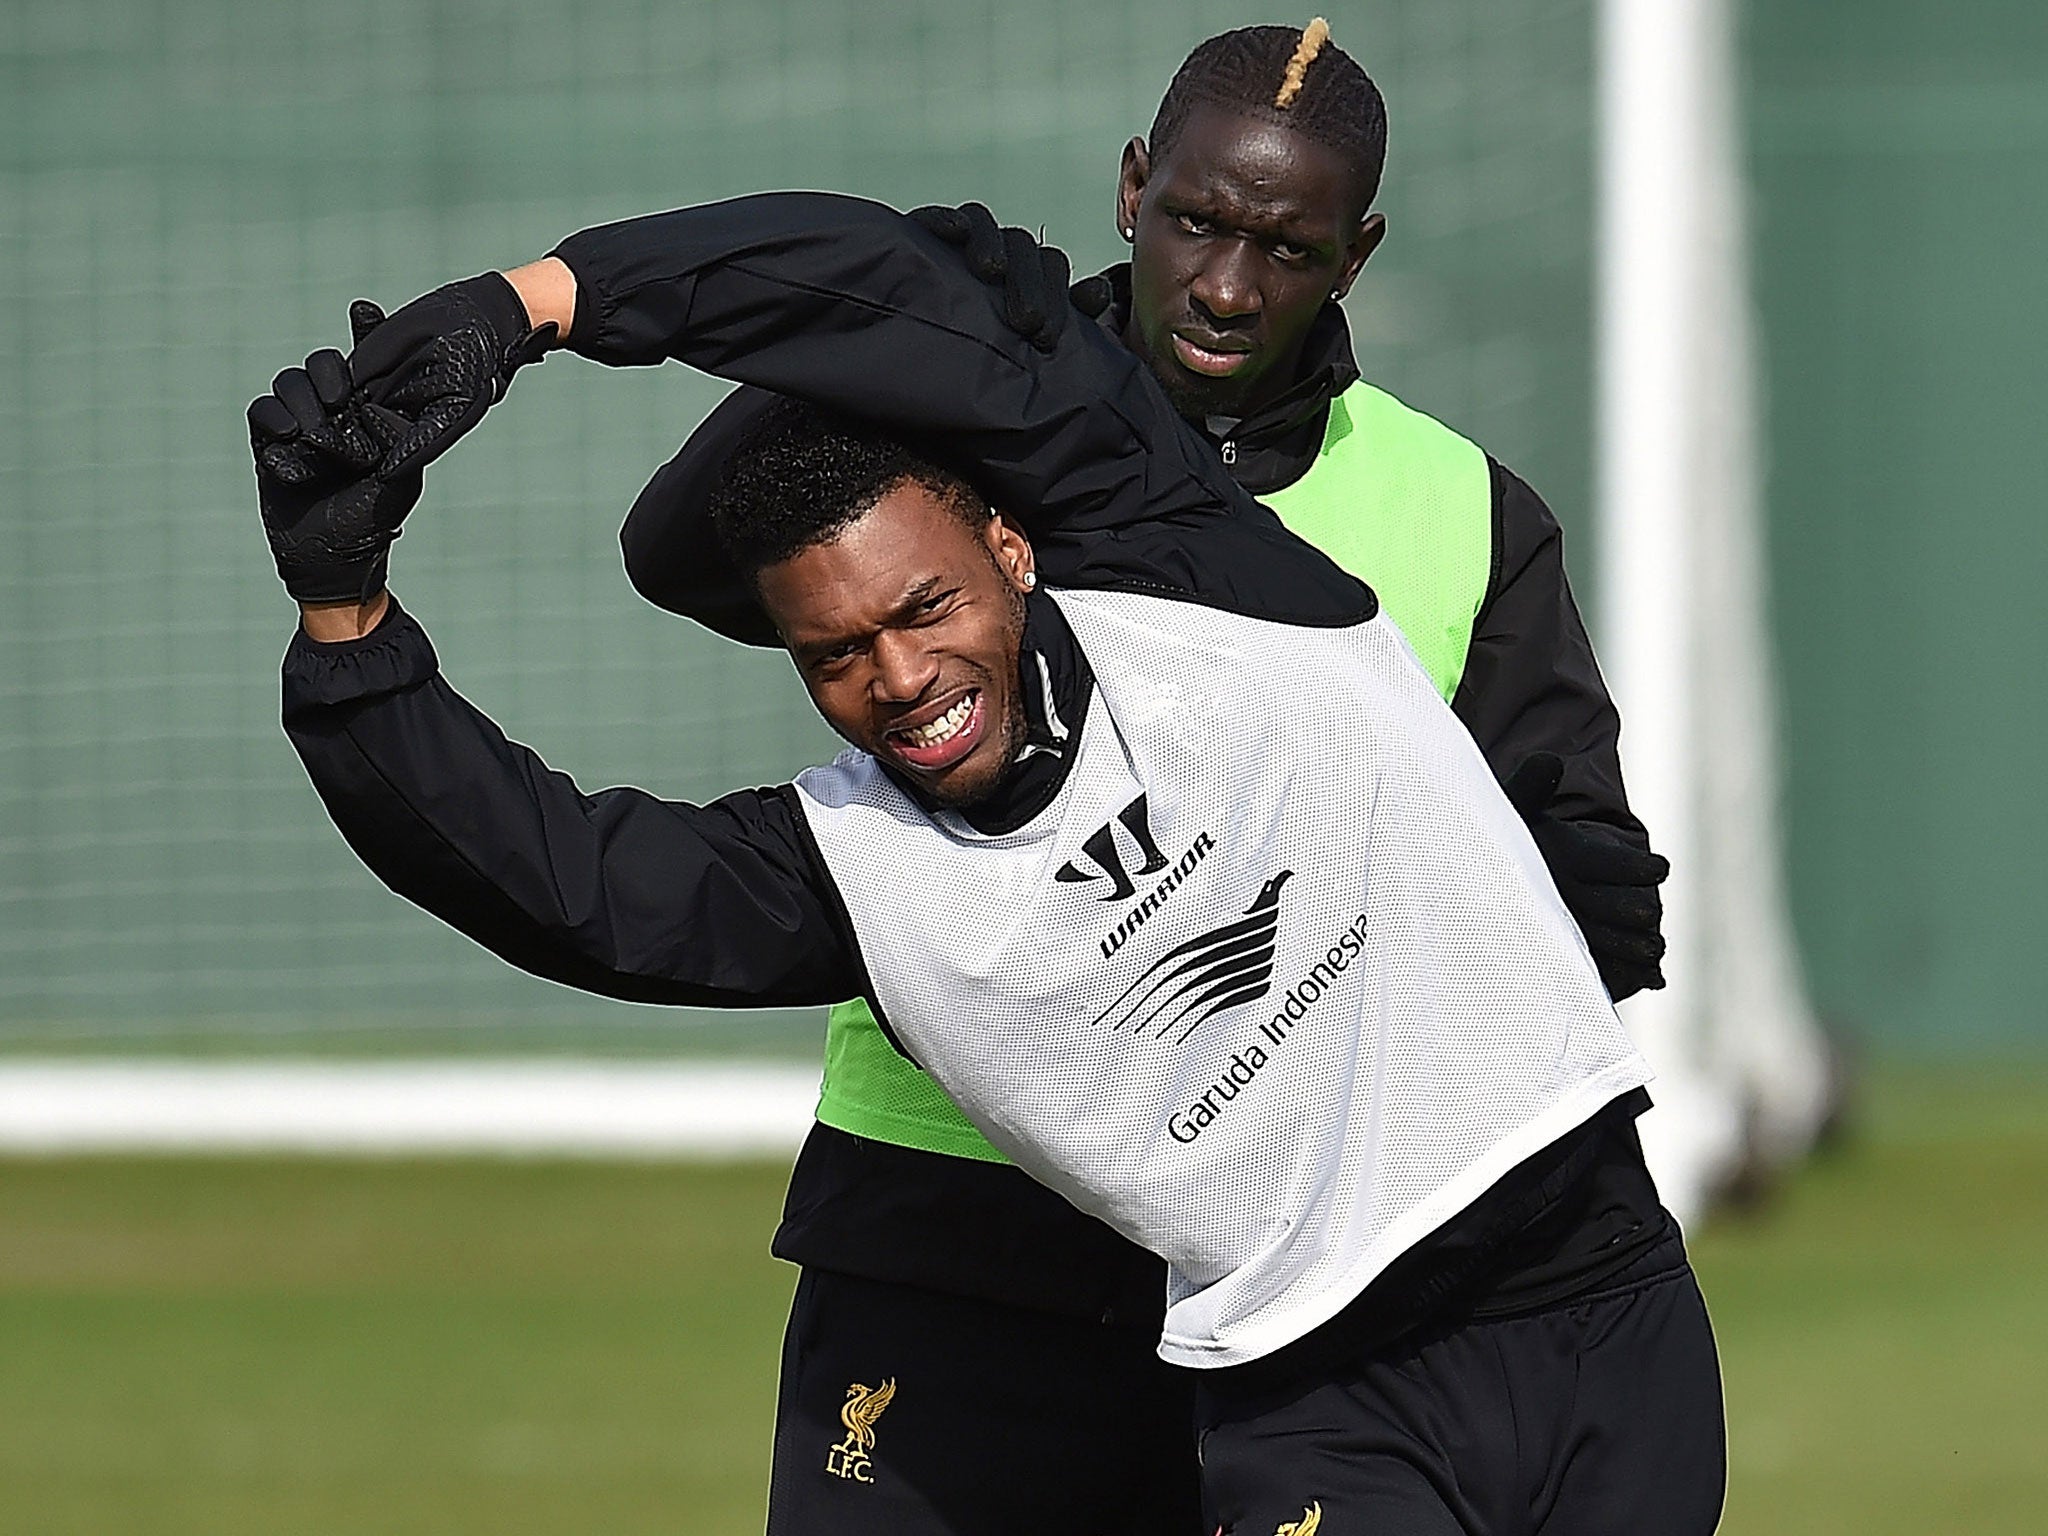 Daniel Sturridge could return from a hip injury to face Arsenal